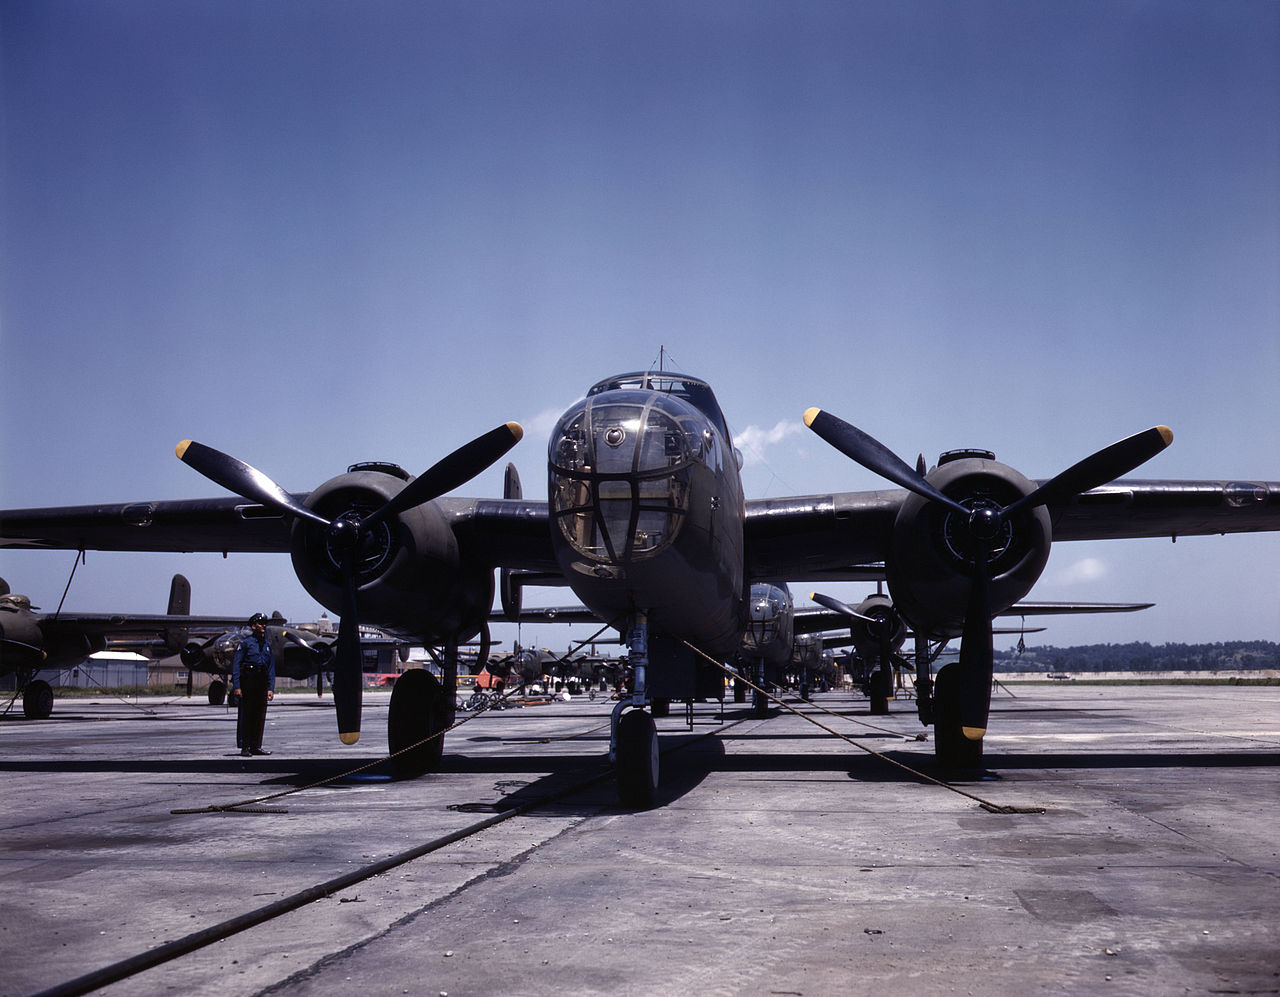 B-25 bombers on the outdoor assembly line at the North American Aviation plant in Kansas City, Kansas. Almost ready for their first test flight.